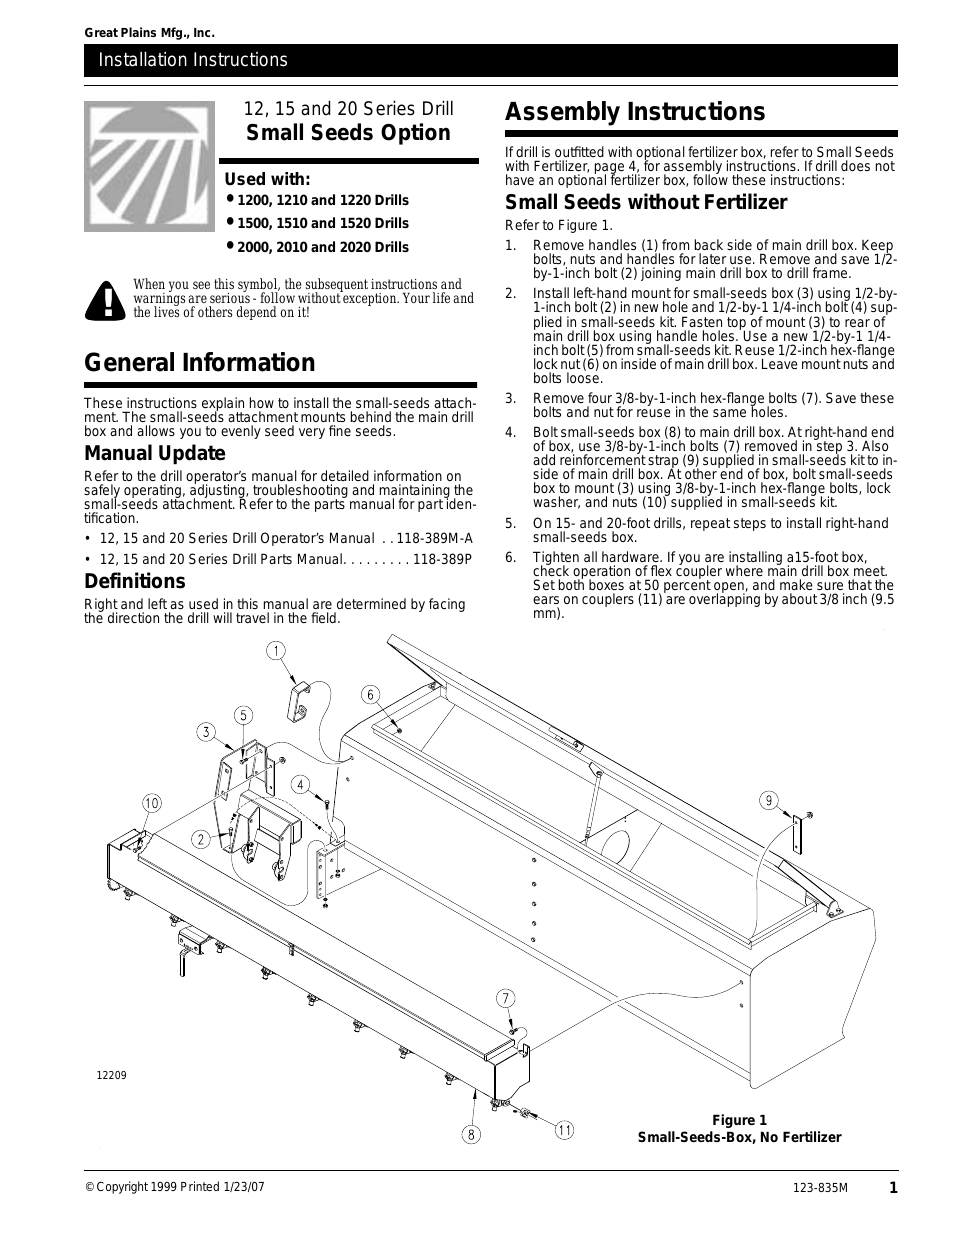 12 Series Drill Assembly Instructions